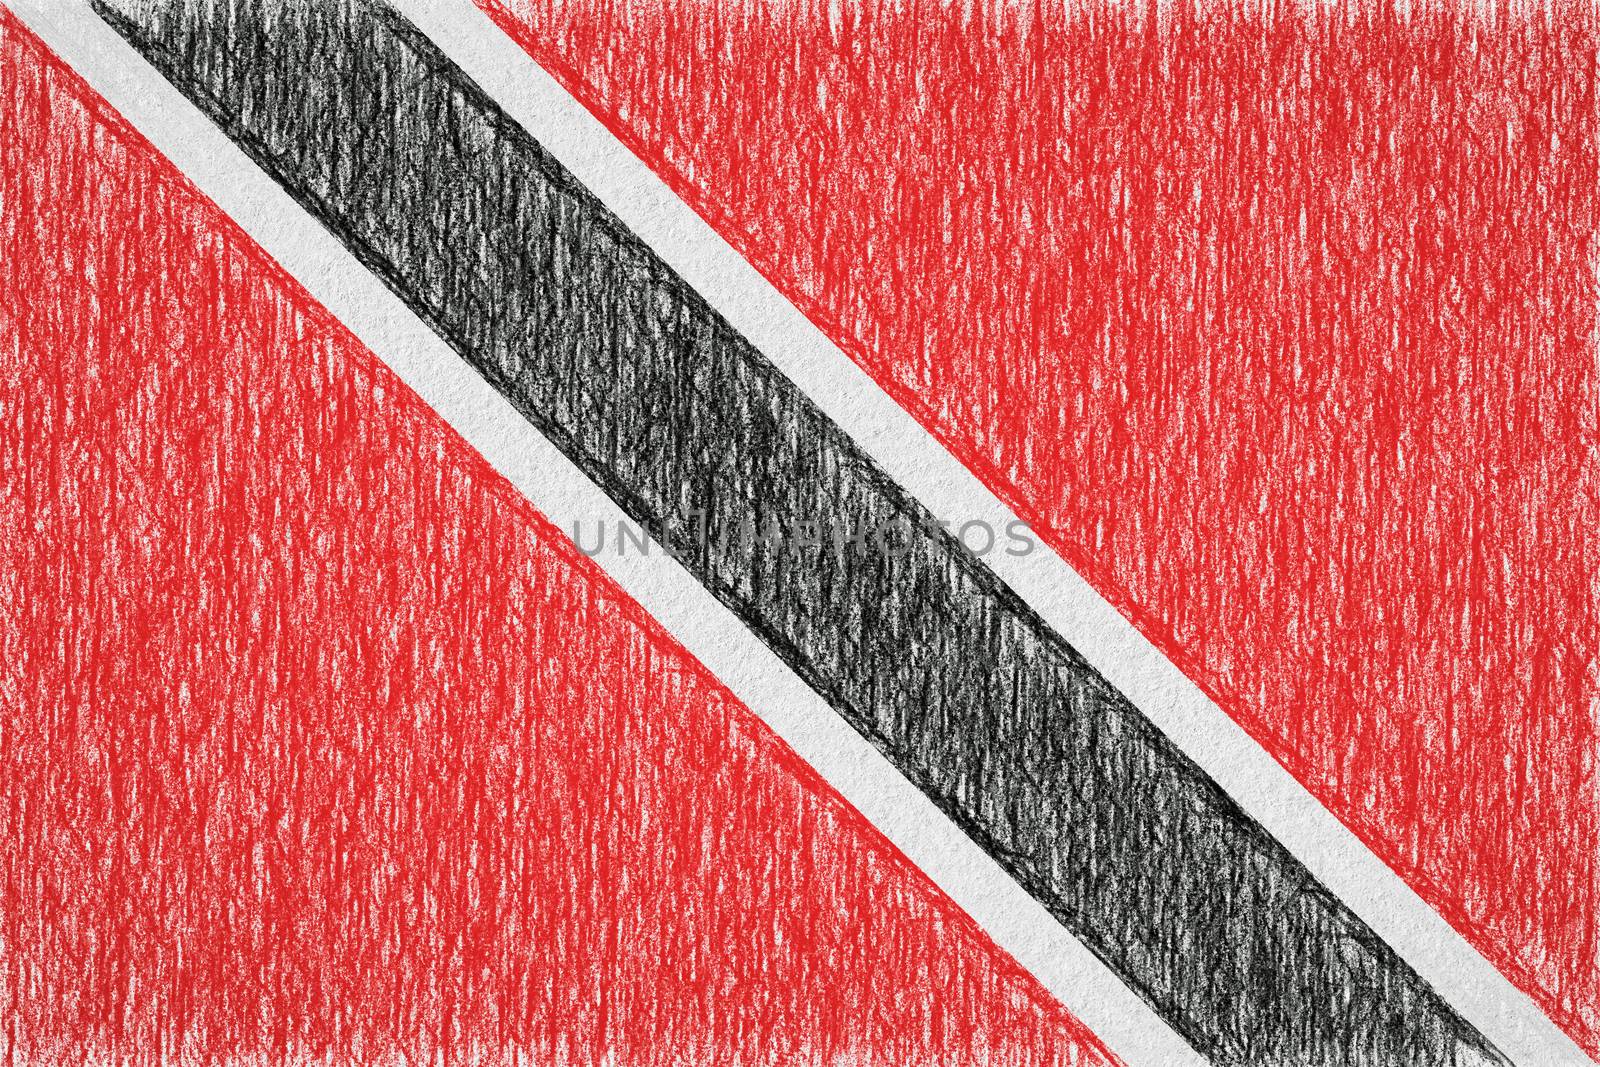 Trinidad and Tobago painted flag by Visual-Content